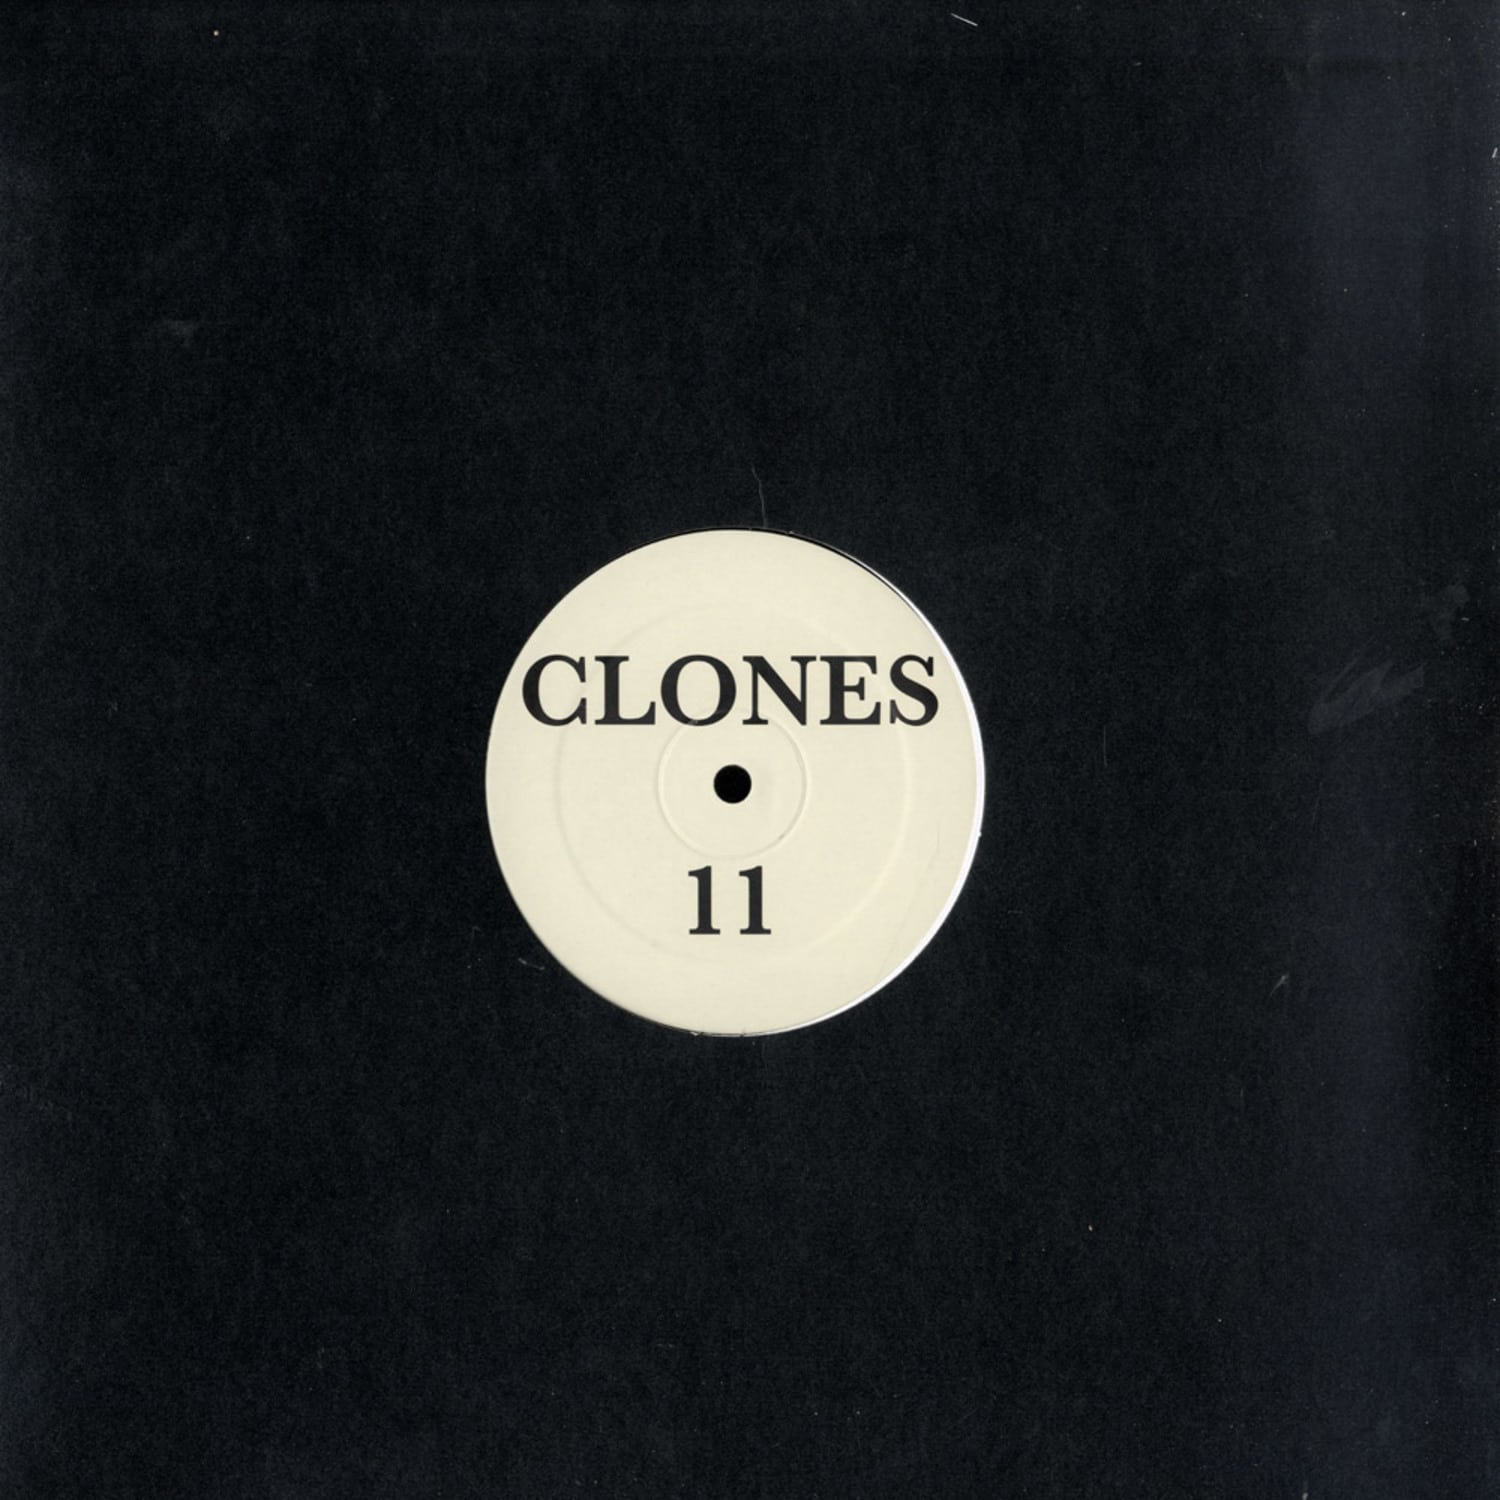 Clones - THE ELEVENTH CHAPTER